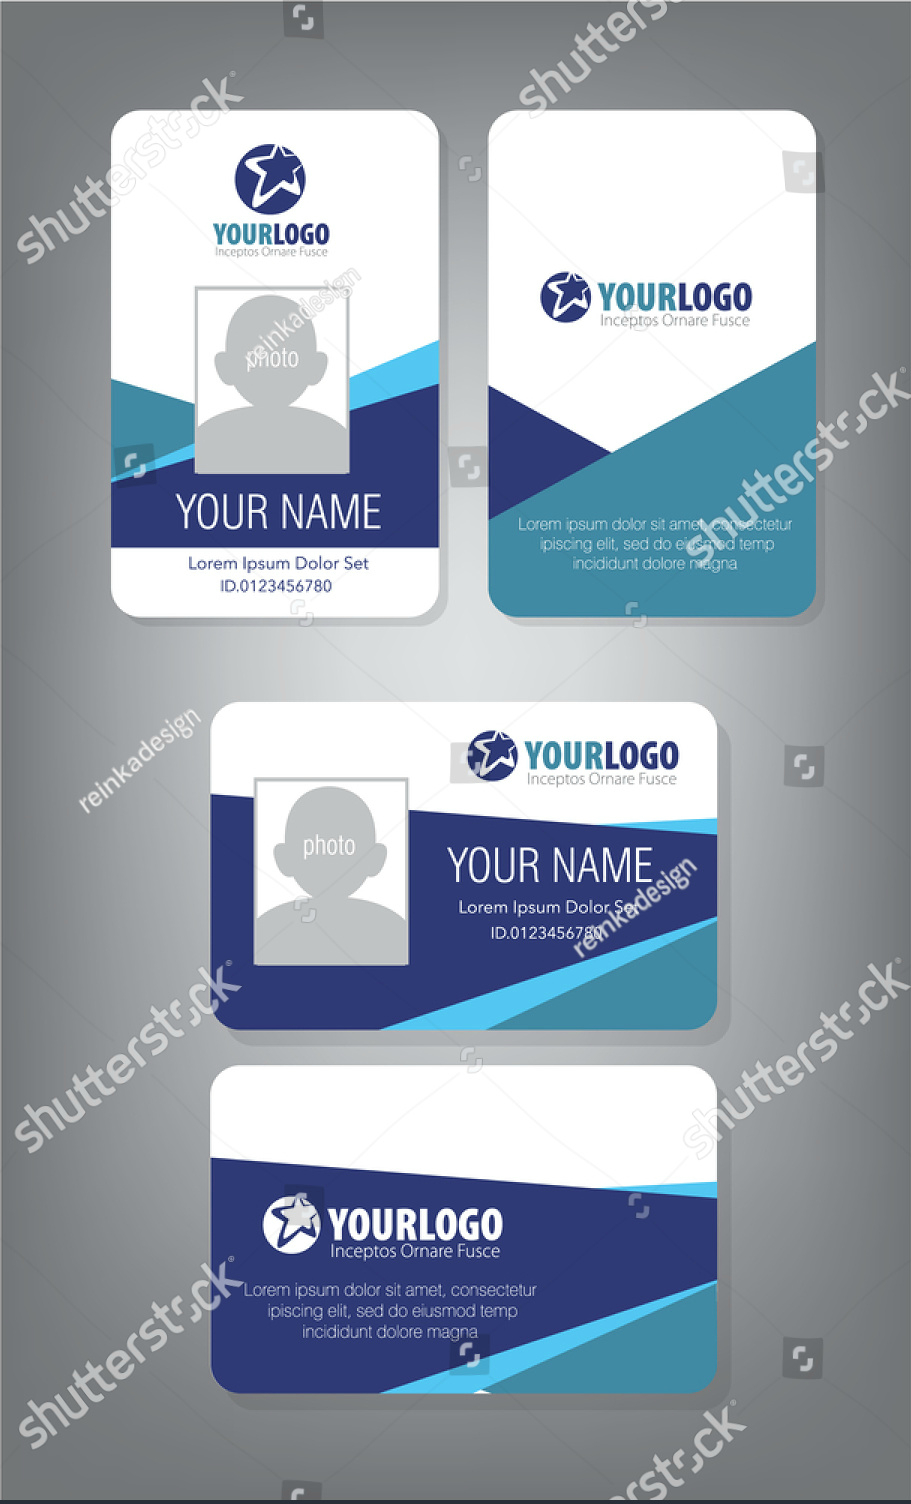 43+ Professional Id Card Designs – Psd, Eps, Ai, Word | Free Inside Faculty Id Card Template